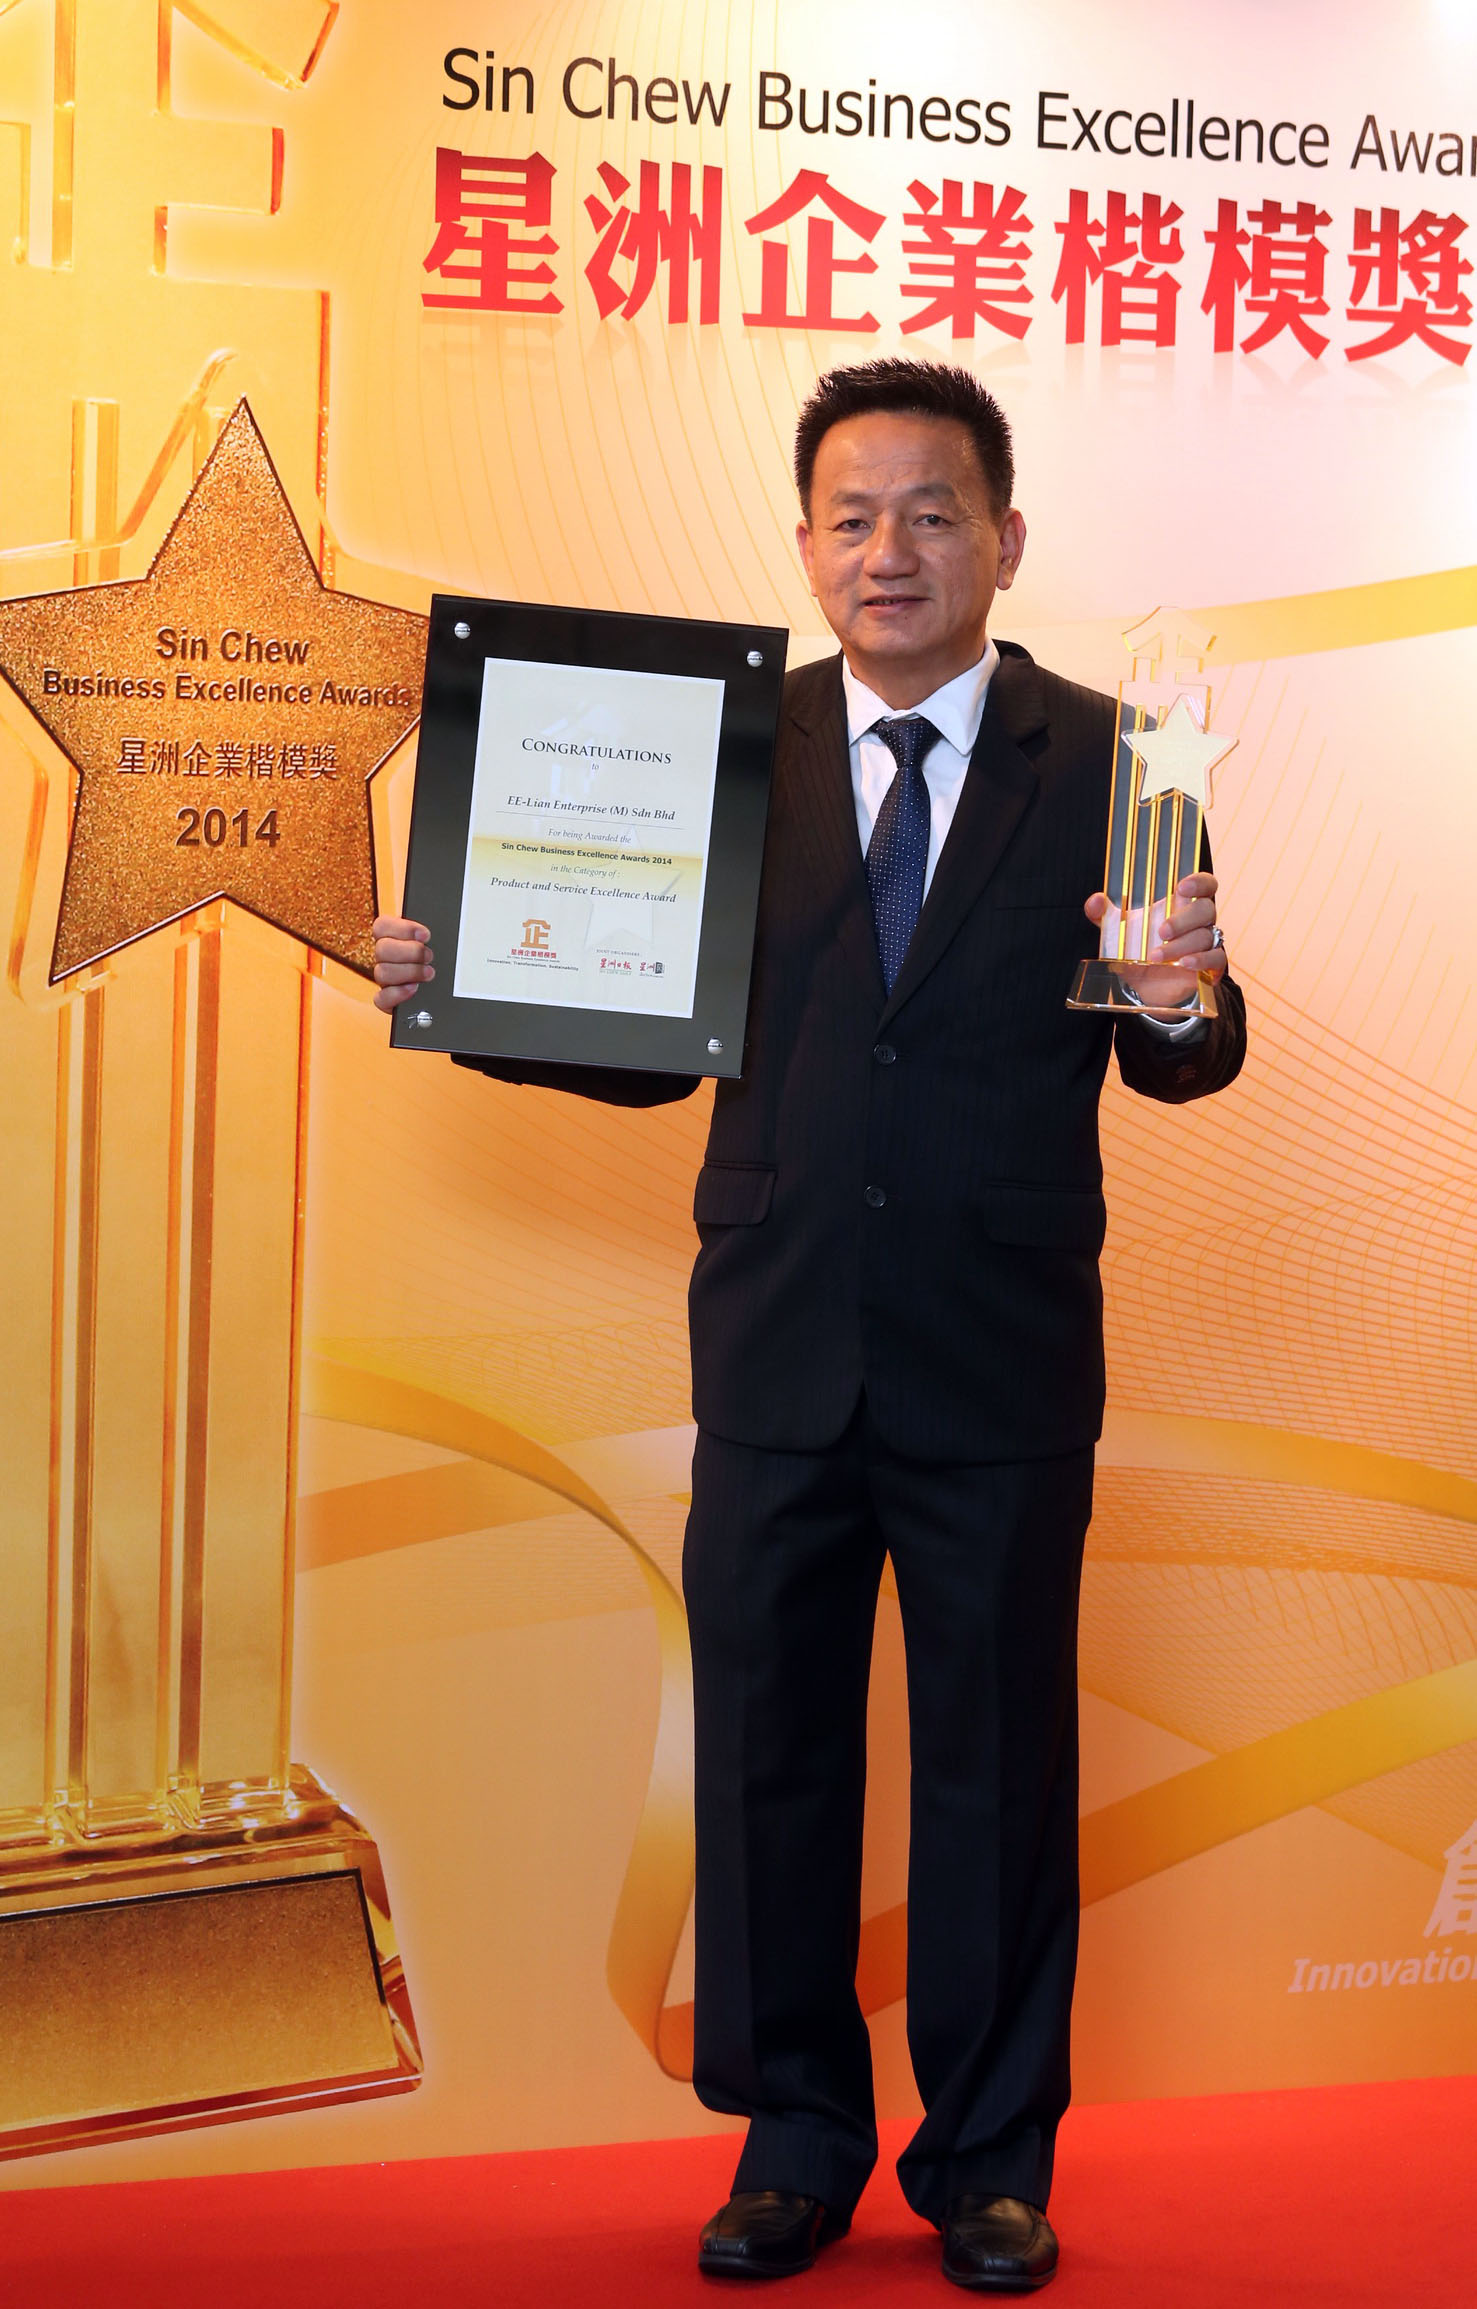 Sin Chew Business Excellence Awards 2014